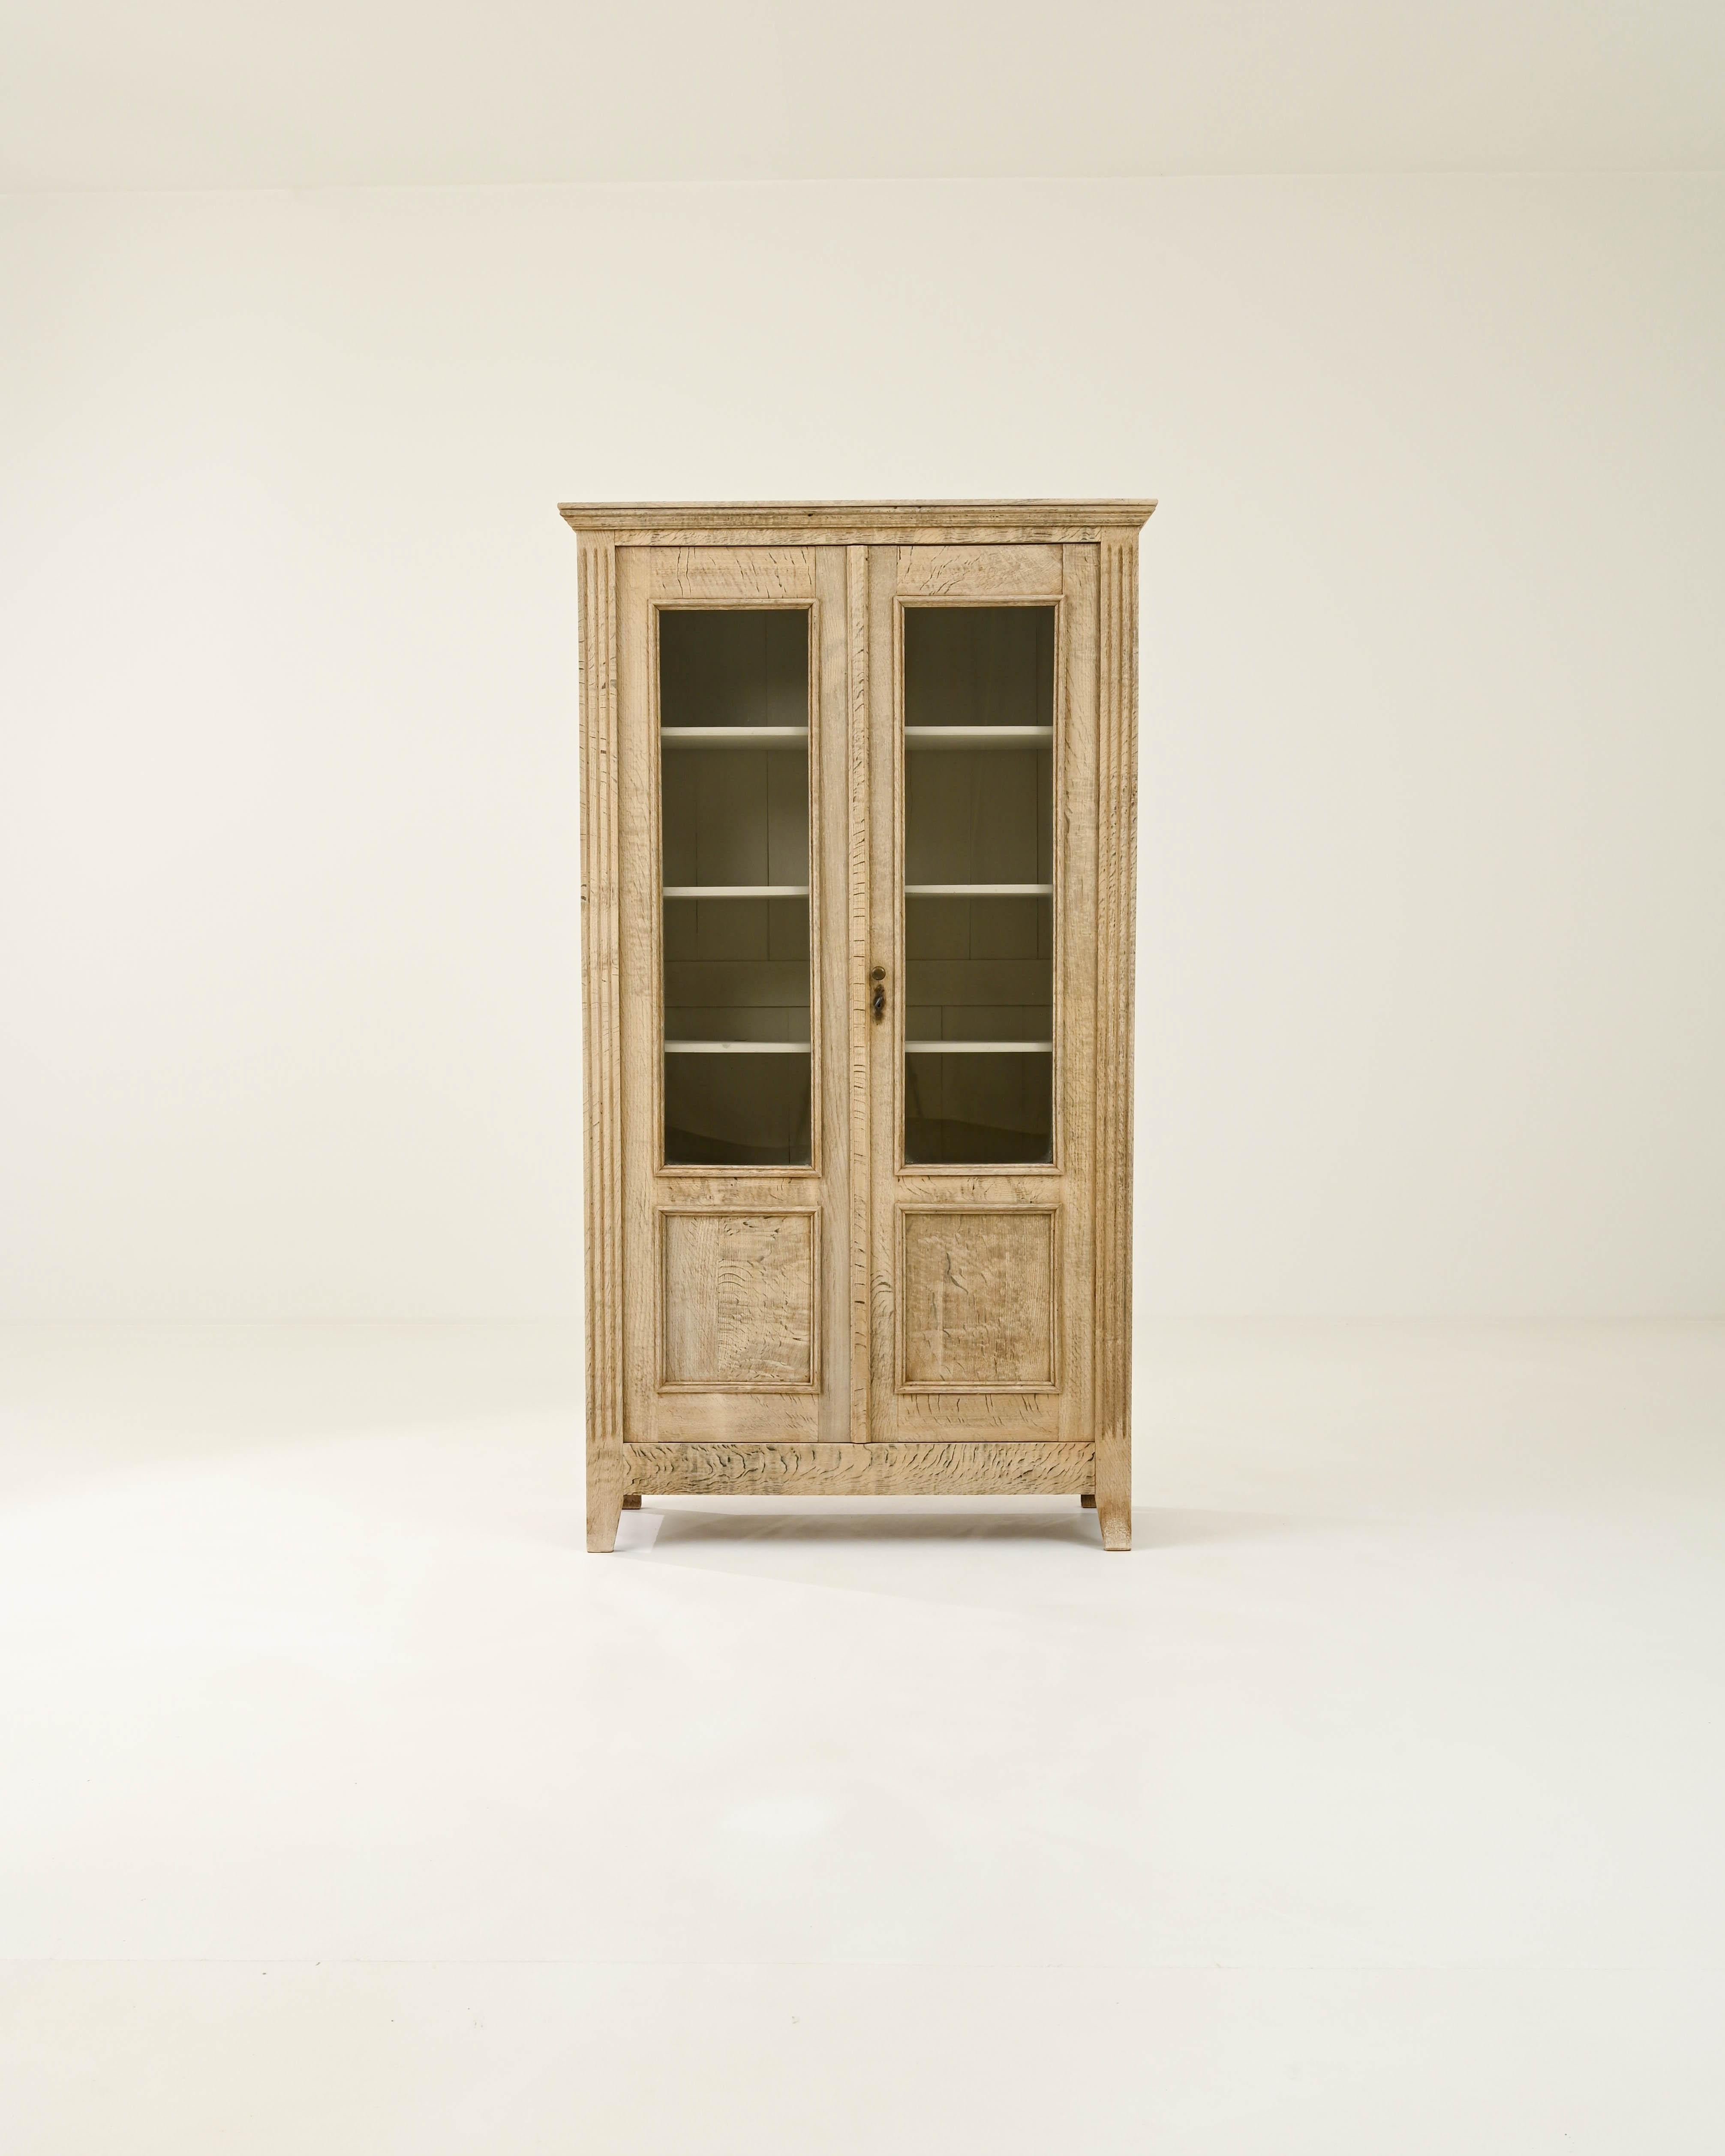 Imposing as the oak tree that allowed the birth of this vitrine from the nineteenth century, this piece has stood strong through the years. Carved with neoclassical decorations resembling the architecture of the era, this cabinet serves as a